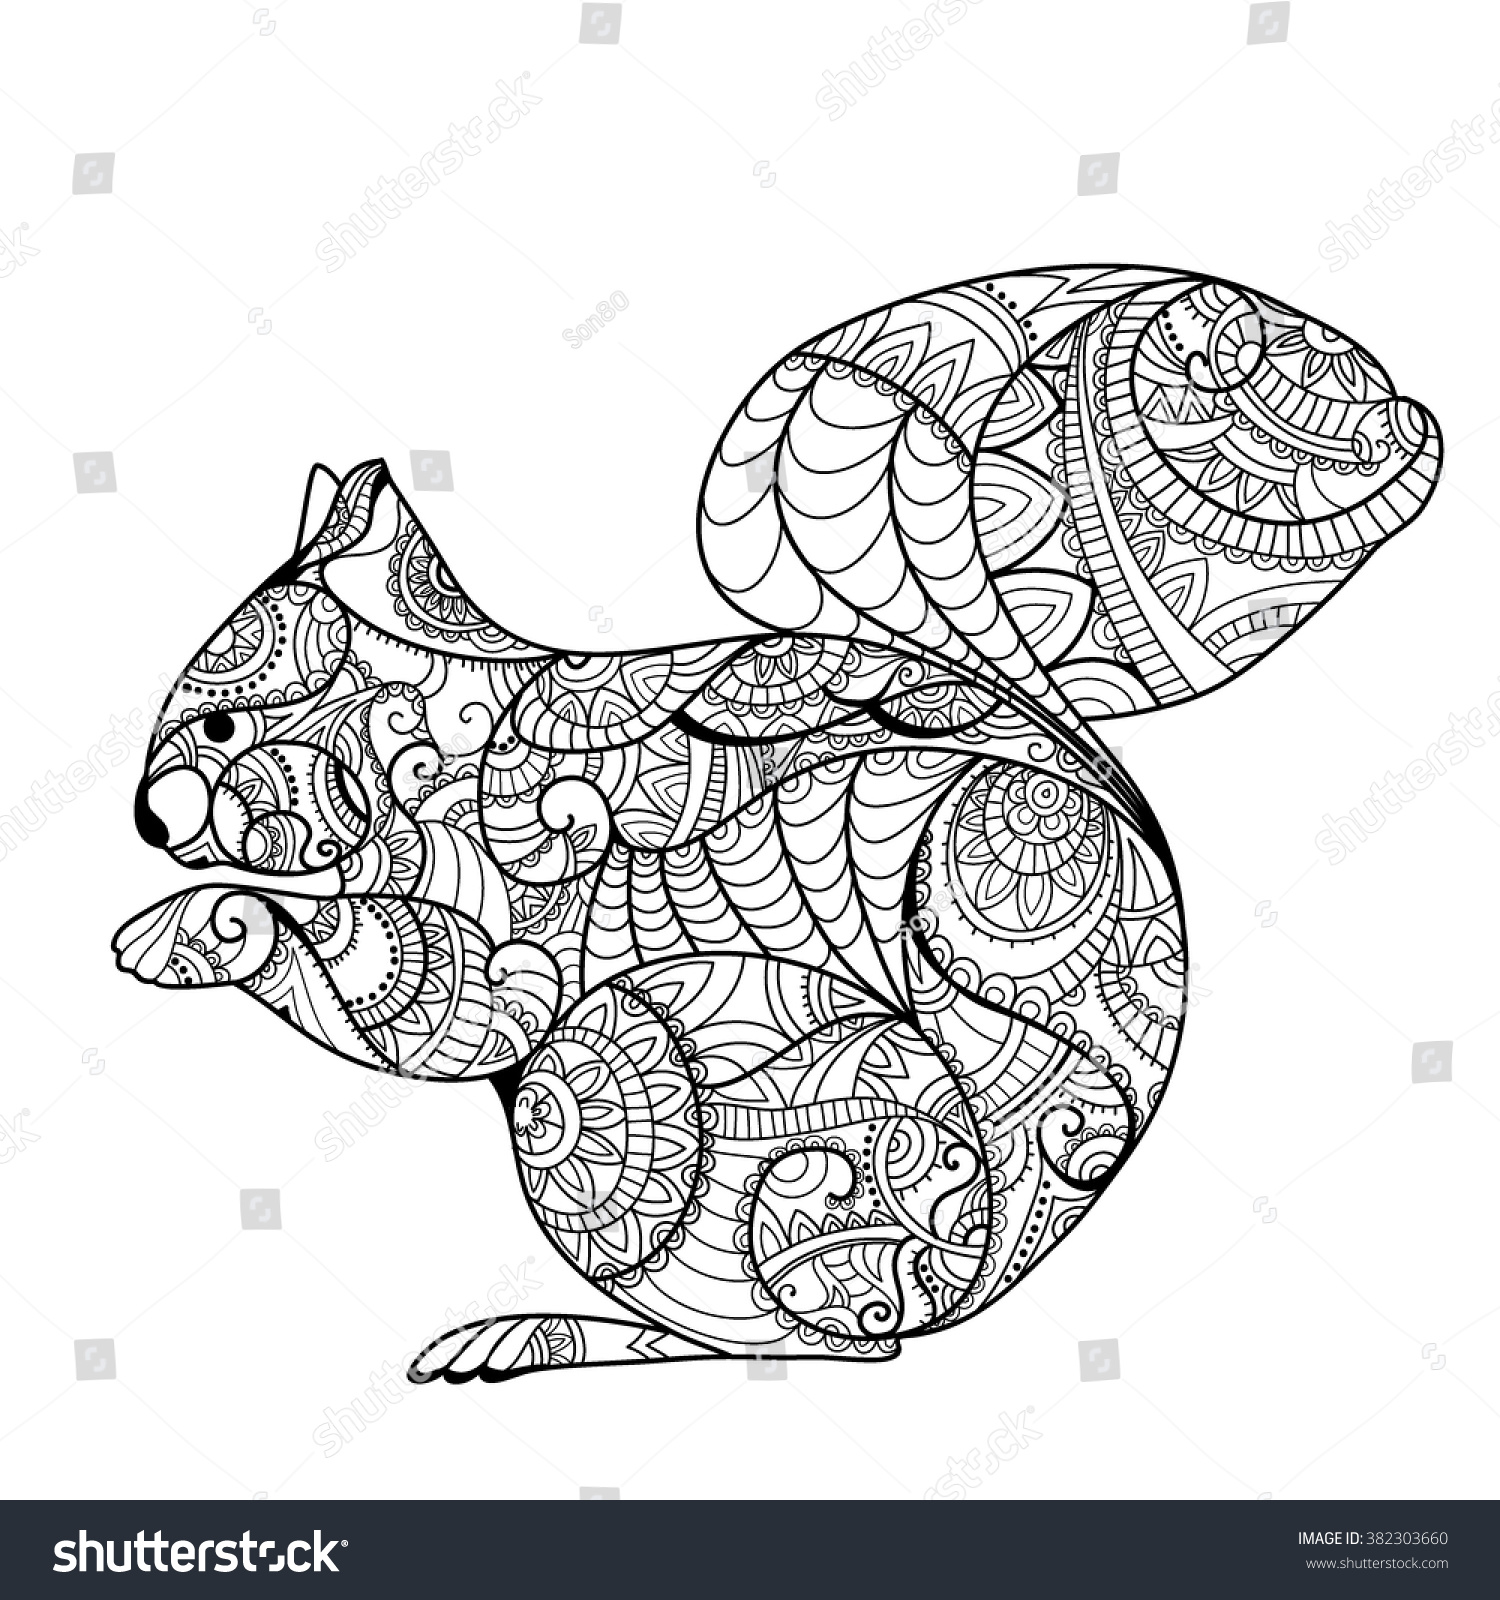 Squirrel Coloring book Hand drawn funny squirrel with nut for adult anti stress Coloring